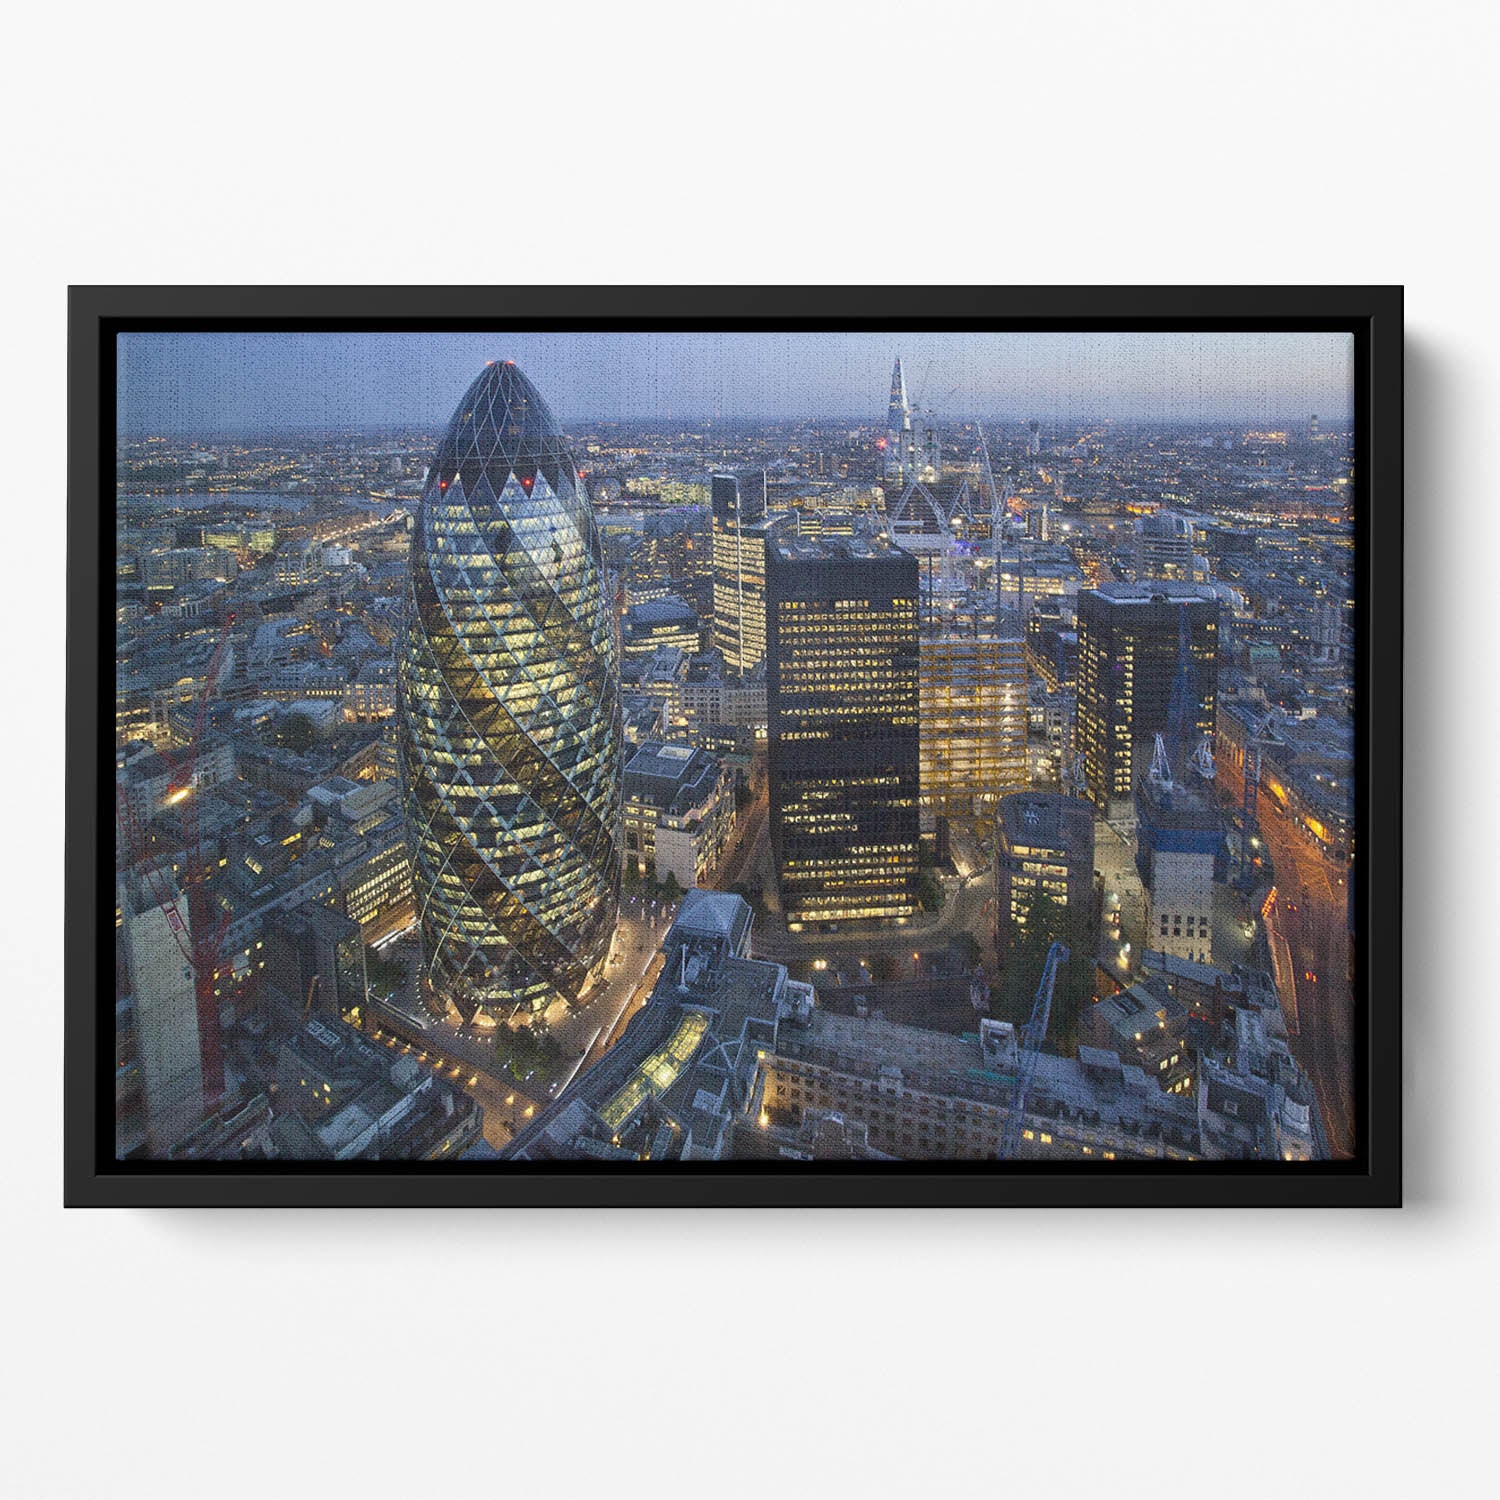 City of London lit up at night Floating Framed Canvas